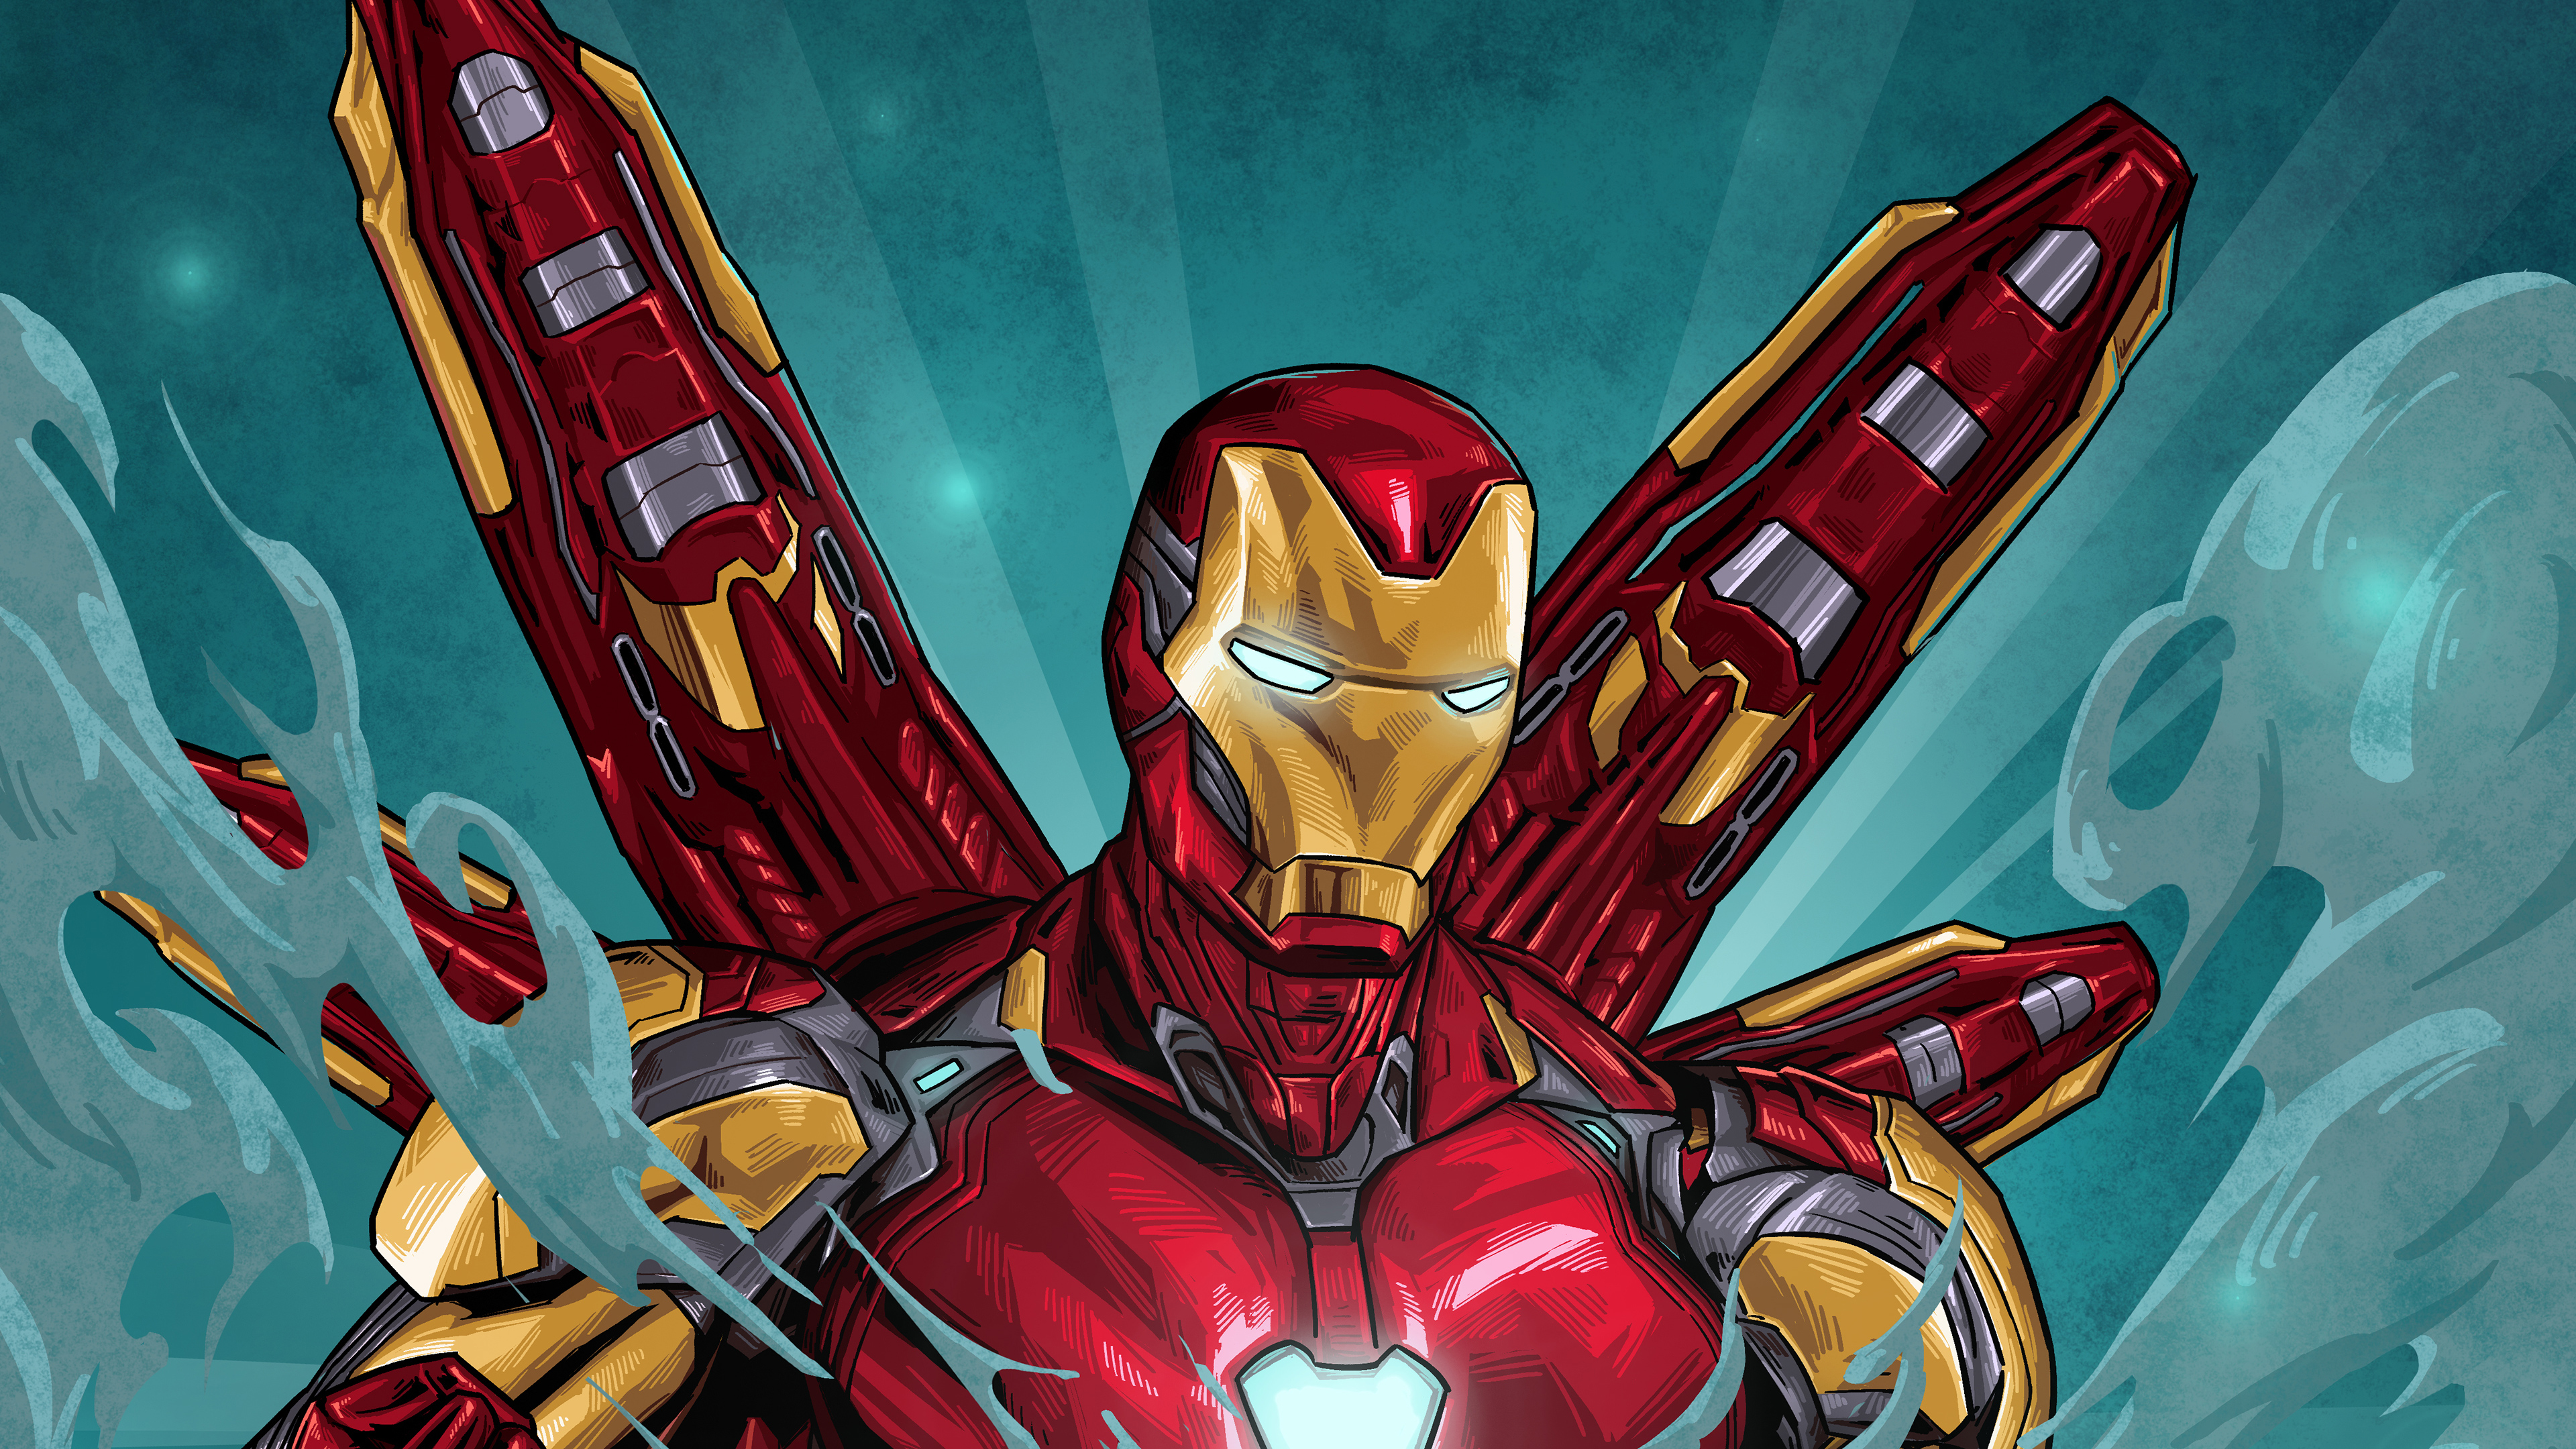 Destop Wallpaper Iron Man : Iron Man 2019 Wallpapers - Wallpaper Cave : Here you can find the best avengers desktop wallpapers uploaded by our community.